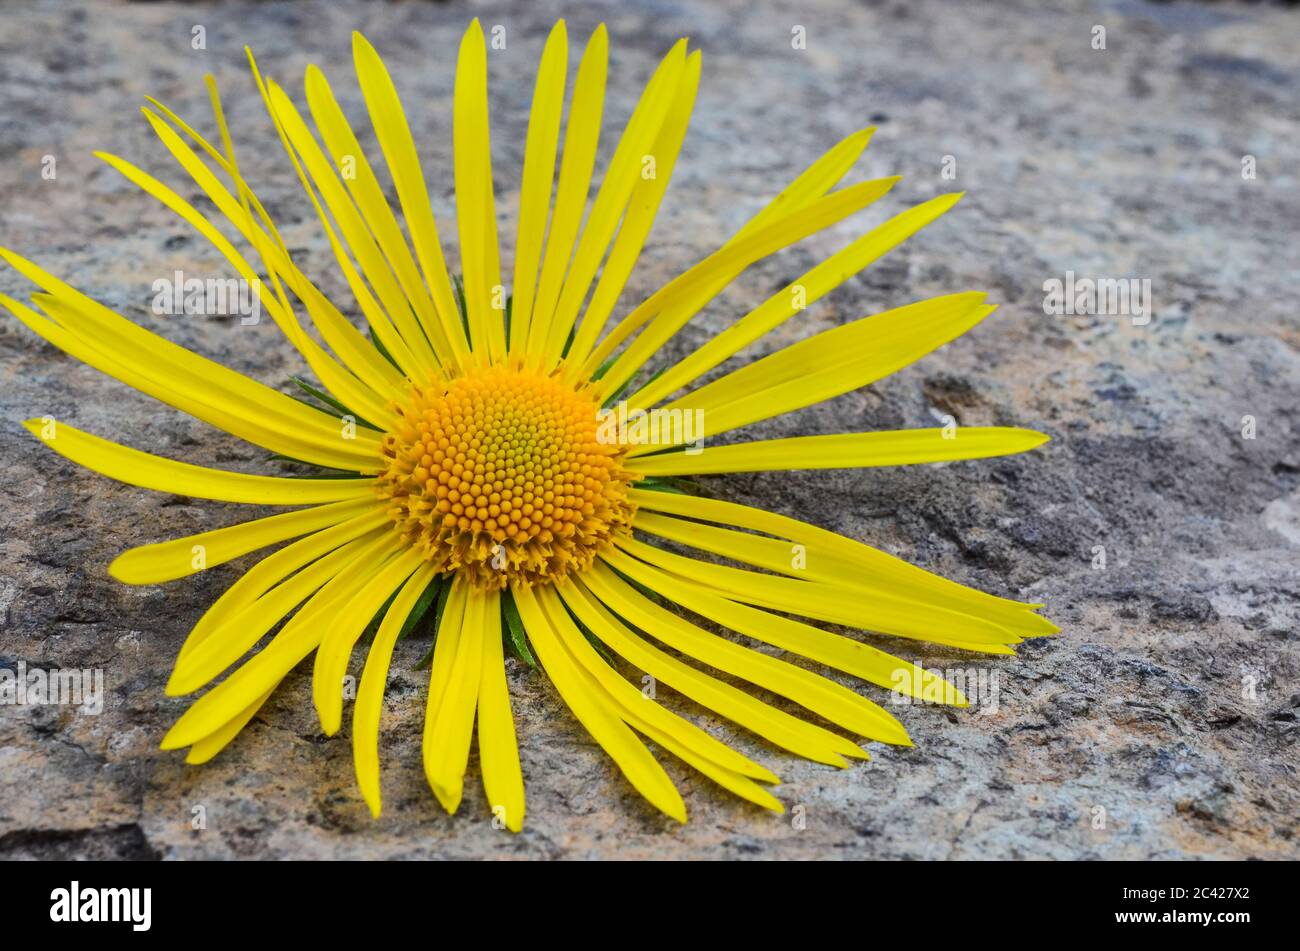 Yellow flower of forest Elecampane ( Inula helenium) or Horse-heal, or Marchalan on natural stone background, close up view Stock Photo